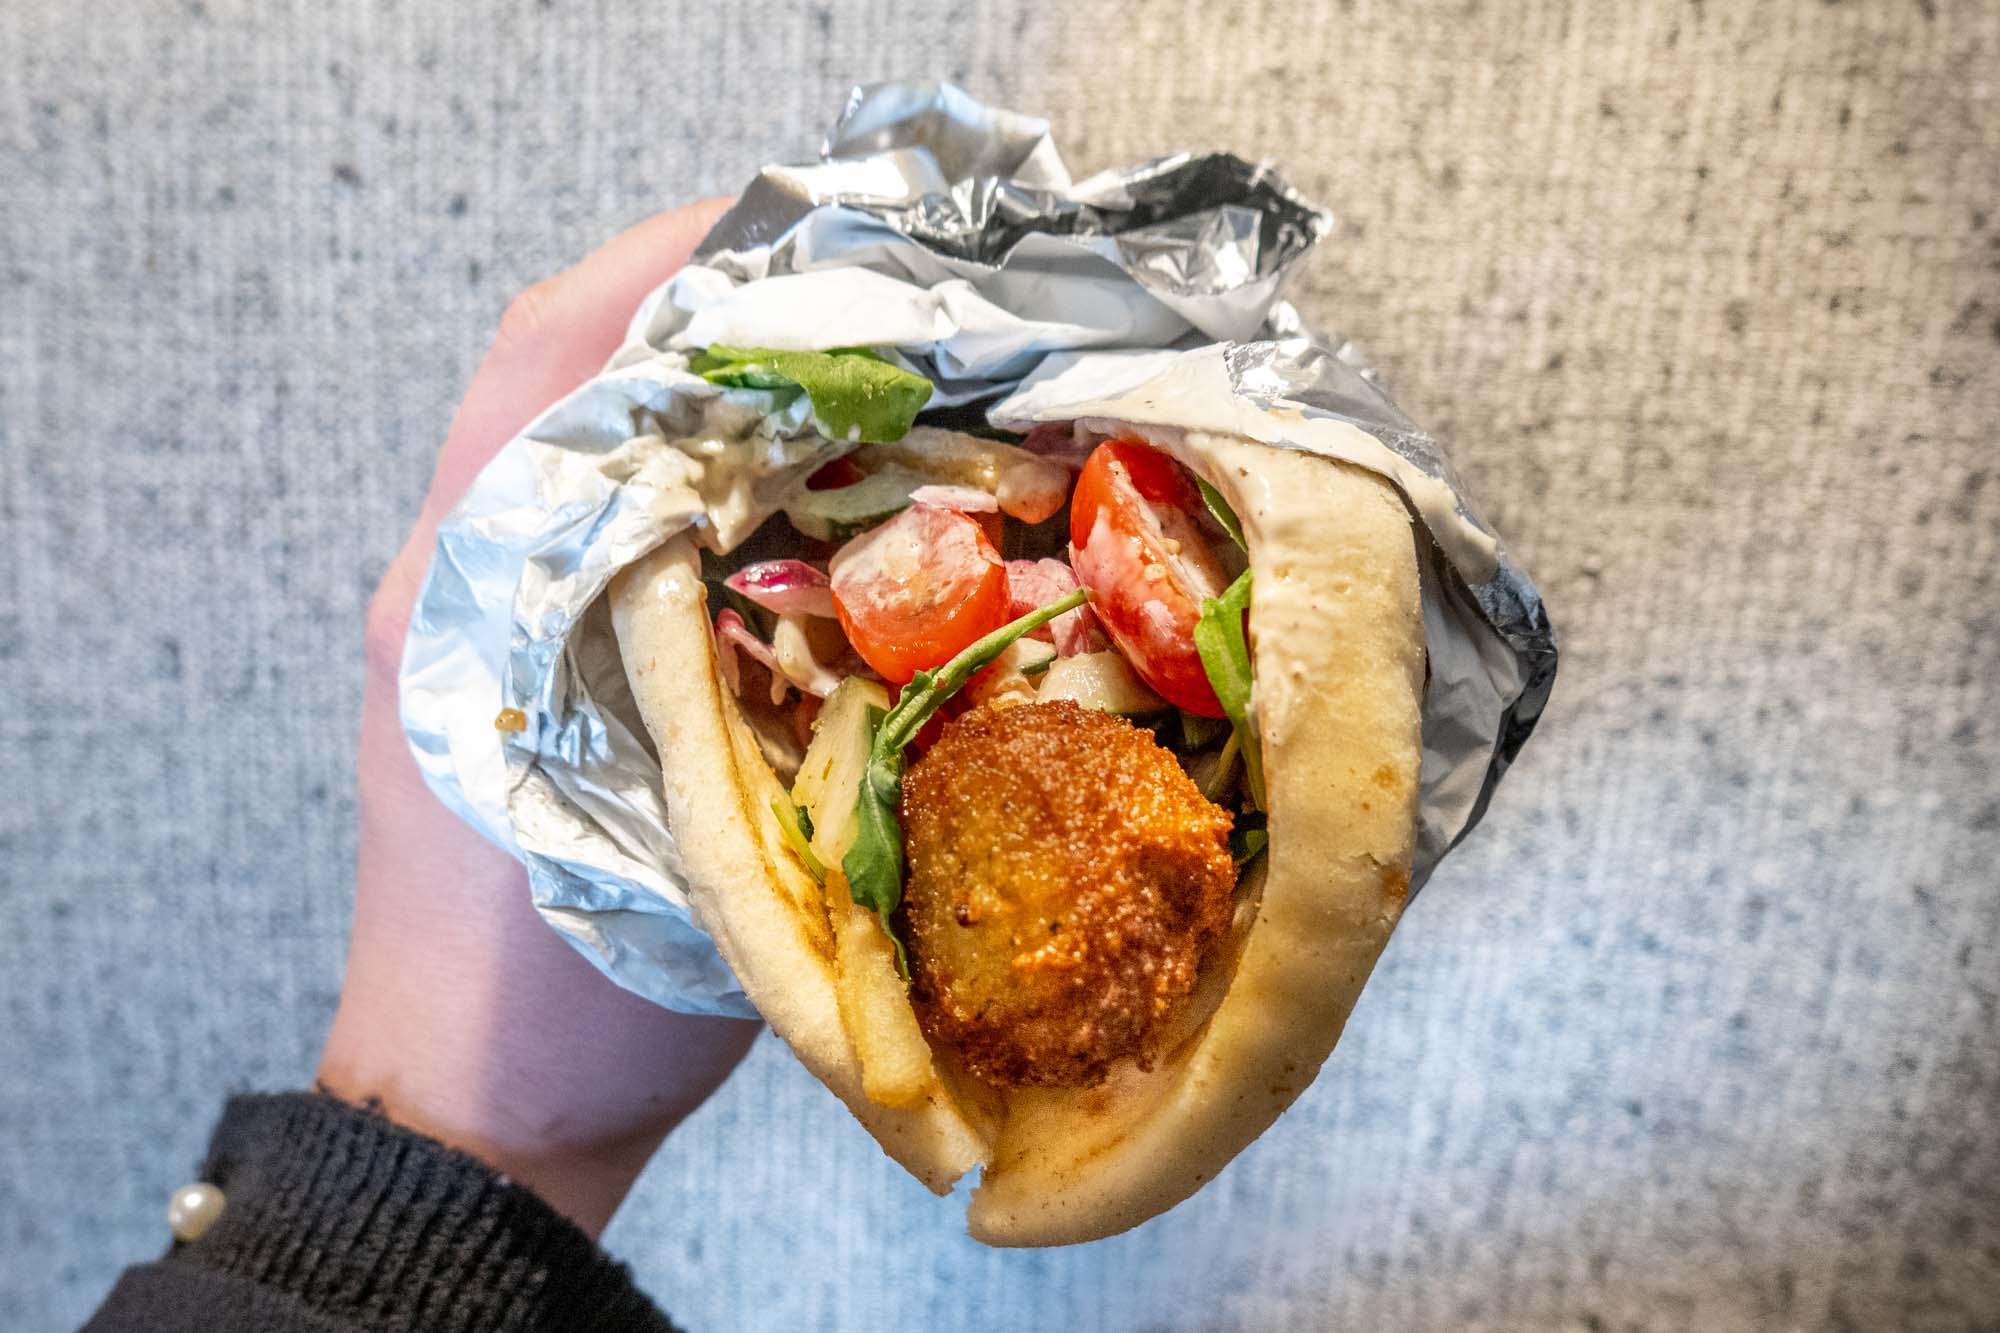 Falafel in a pita with tomatoes, lettuce, and sauce